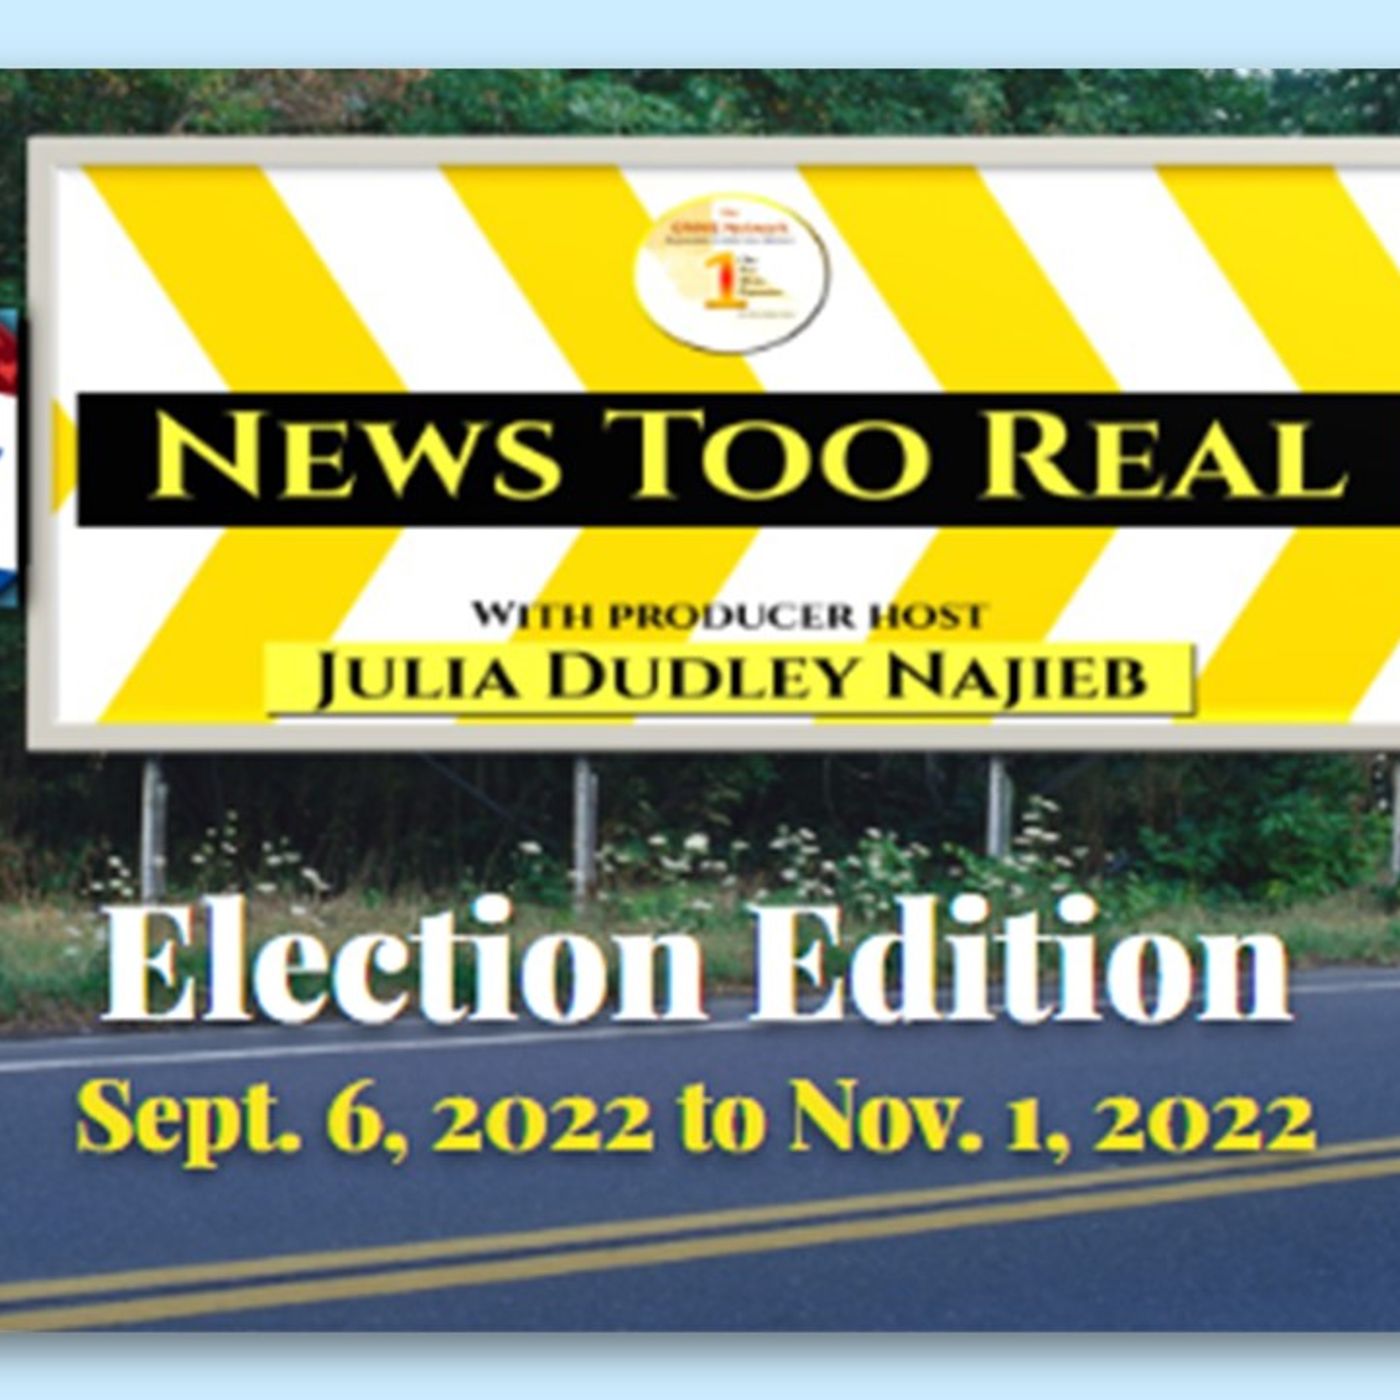 News Too Real- General Election Edition Episode 1 (9-6-22)